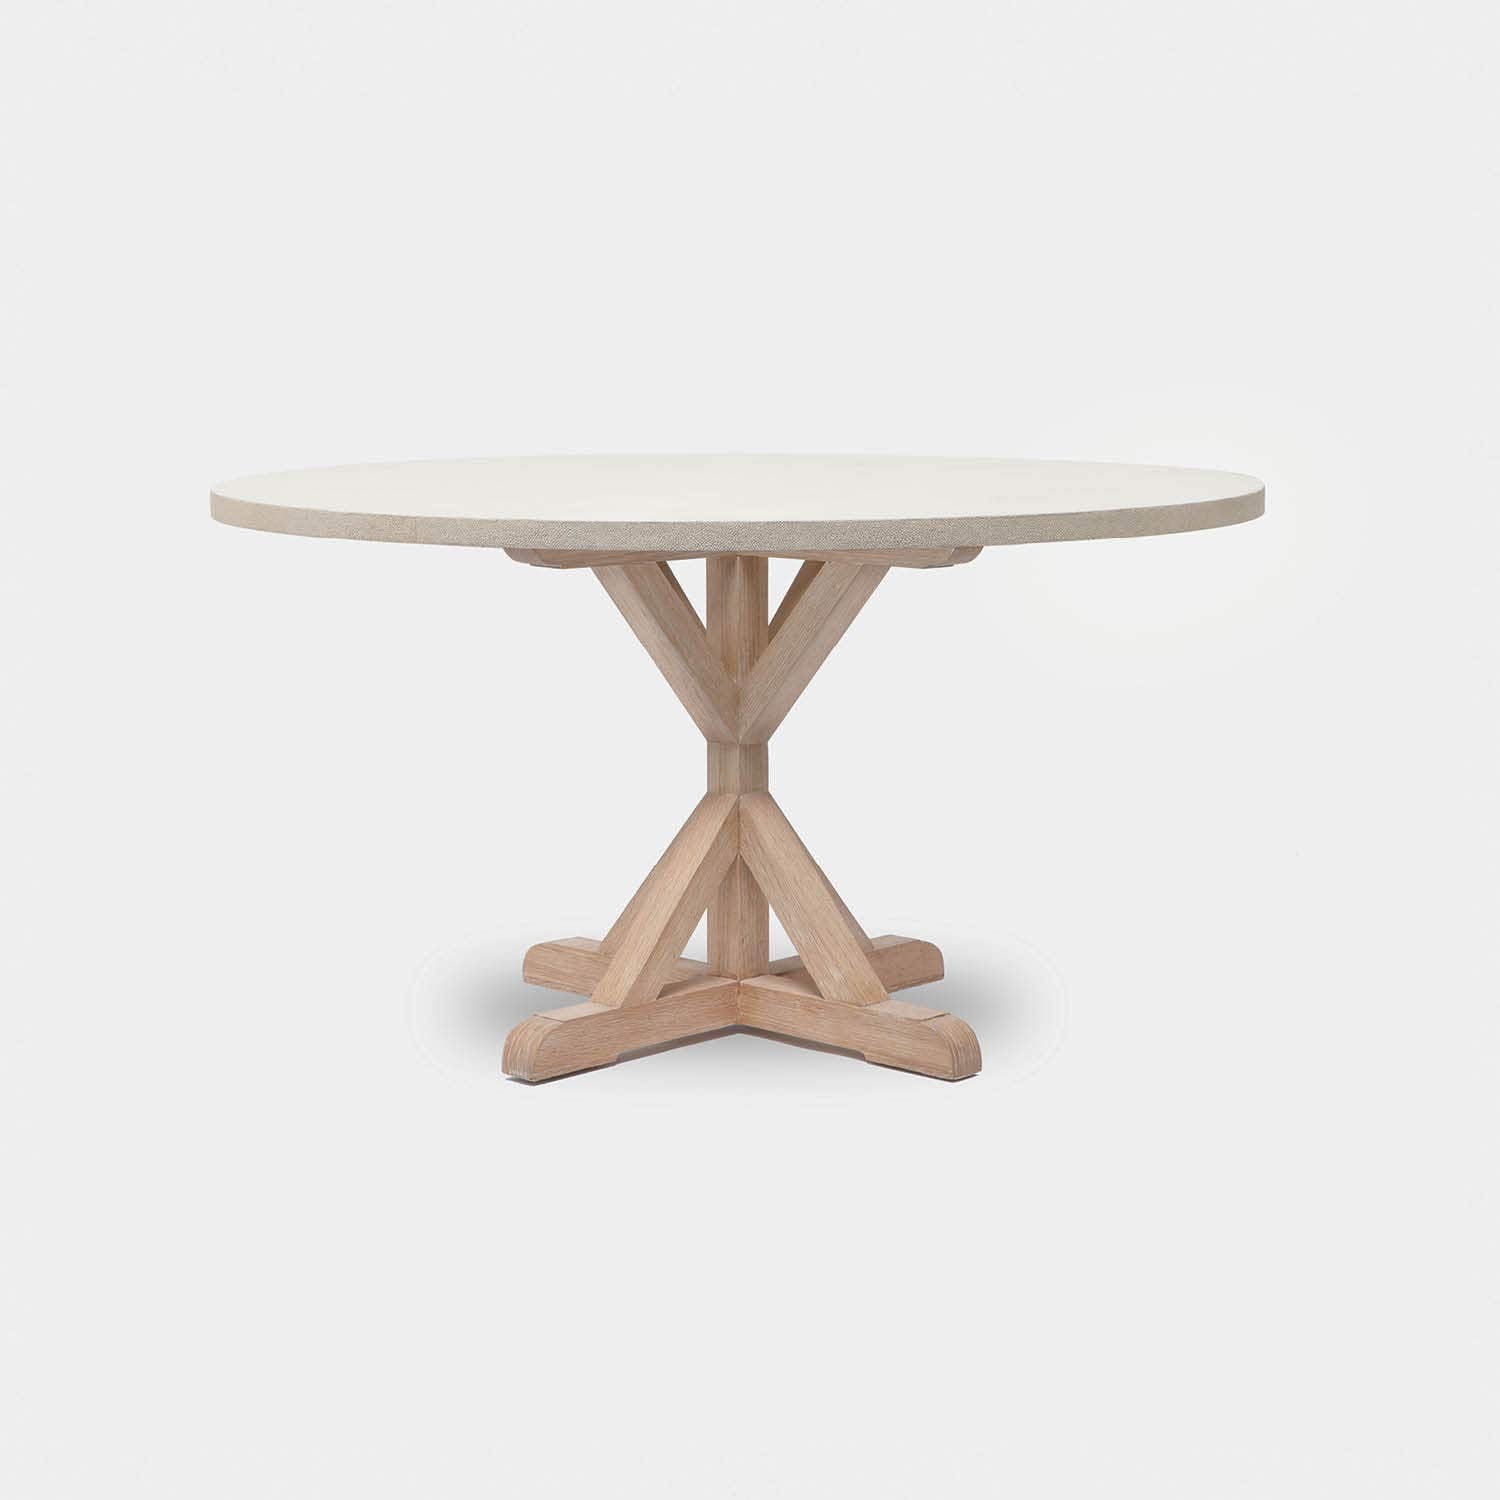 Made Goods Dane 60" x 30" White Cerused Oak Dinning Table With Round White Faux Belgian Linen Table Top